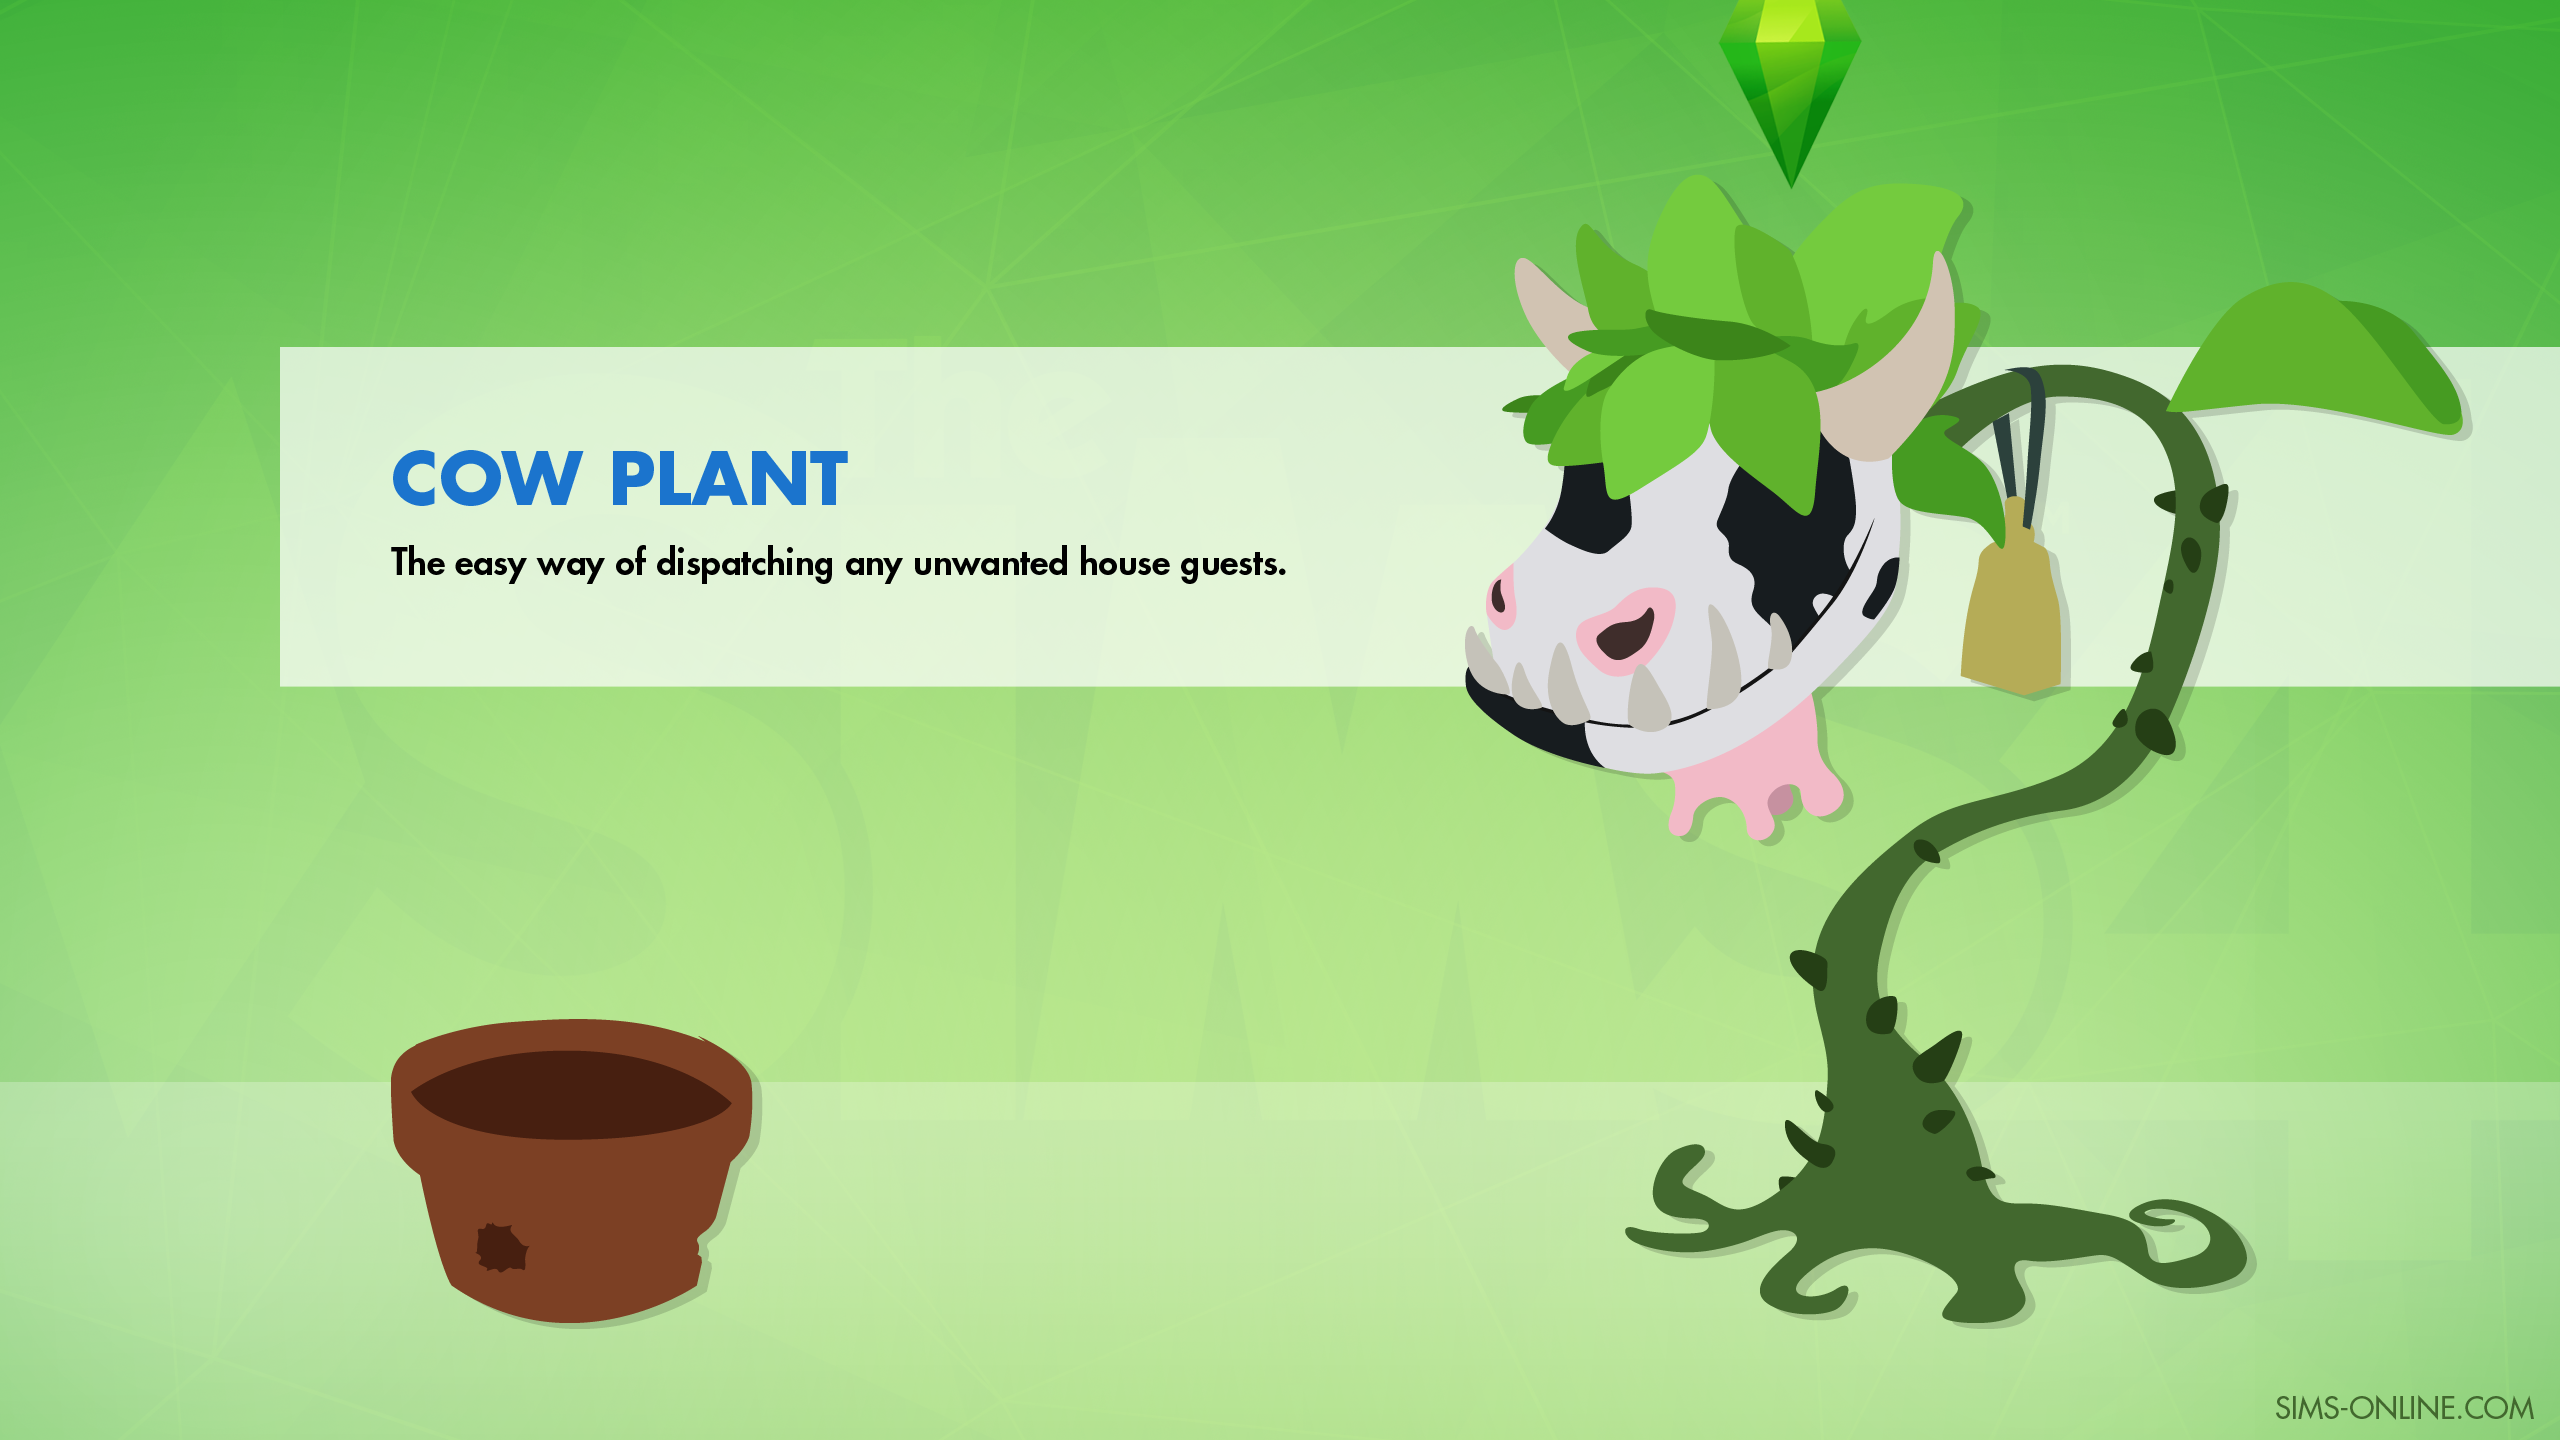 Learn how to get a Cow Plant in The Sims 4!